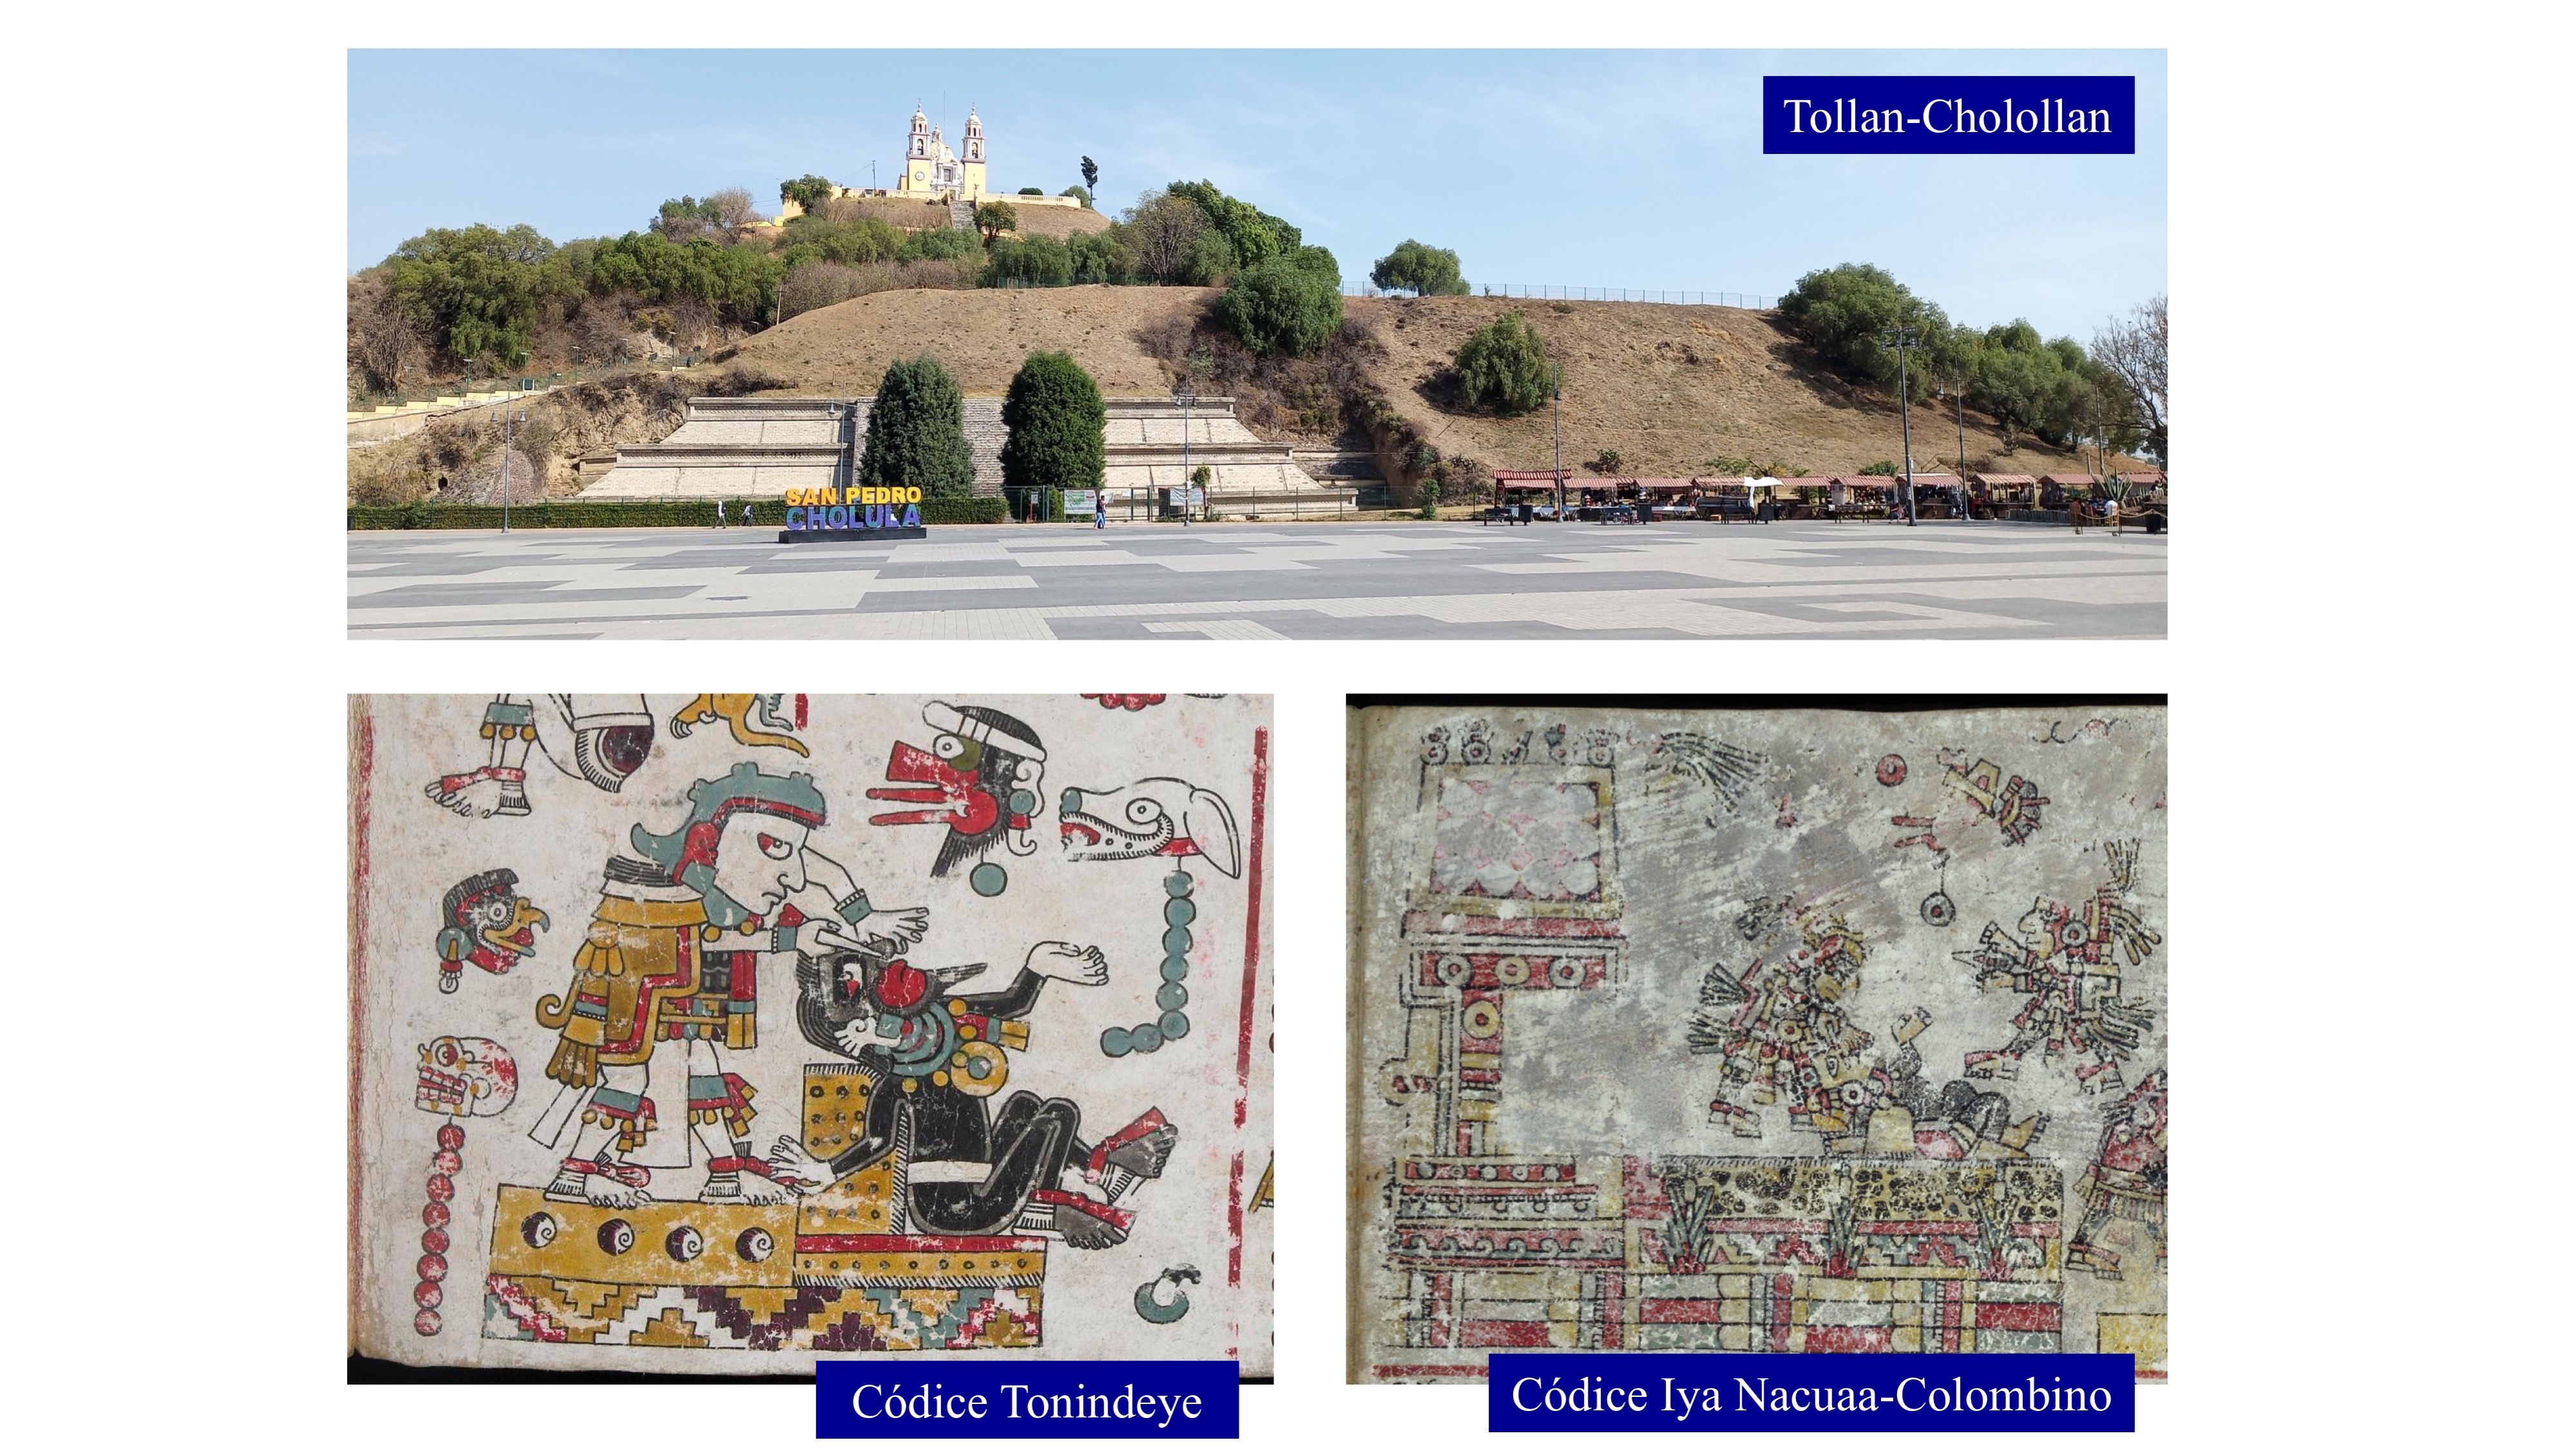 Above: Tollan-Cholollan, labeled, a square by a hill with a building in the background
Below: Two codices, labeled Códice Tonindeye and Códice Iya Nacuaa-Colombino